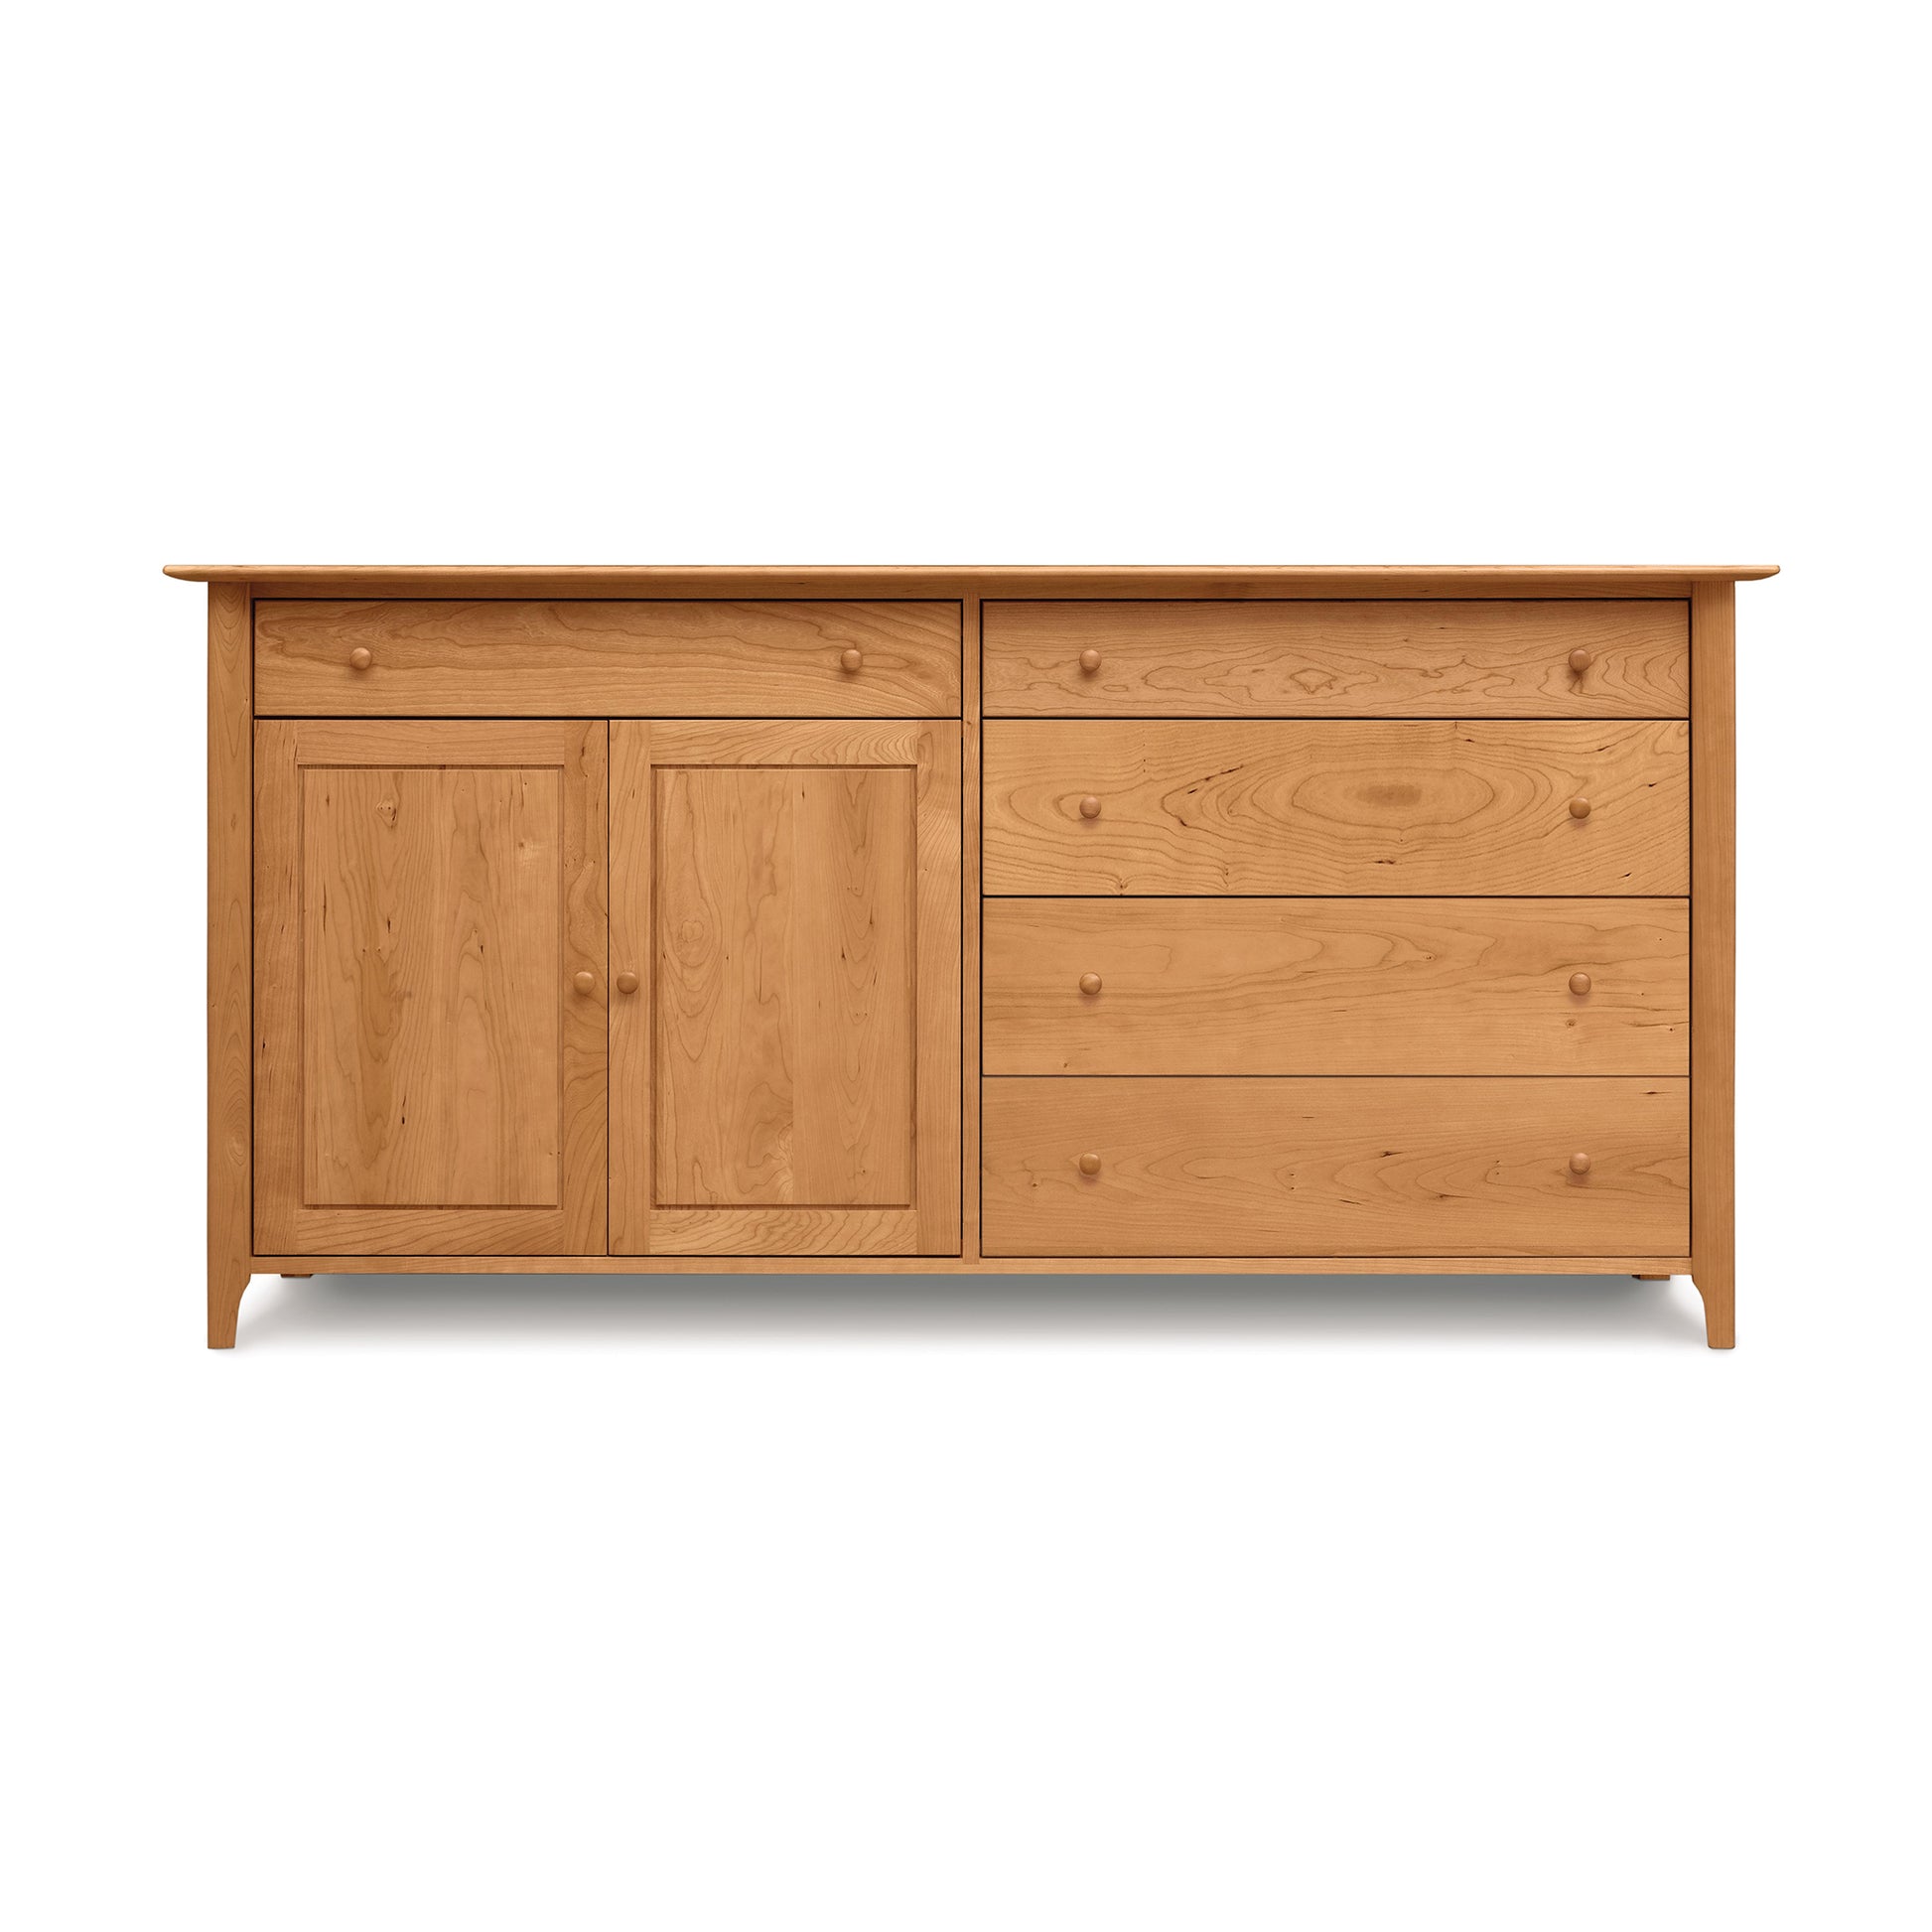 Solid wood sideboard with two cabinet doors and three drawers, isolated on a white background from the Copeland Furniture Sarah 2 Door, 5 Drawer Buffet Collection.